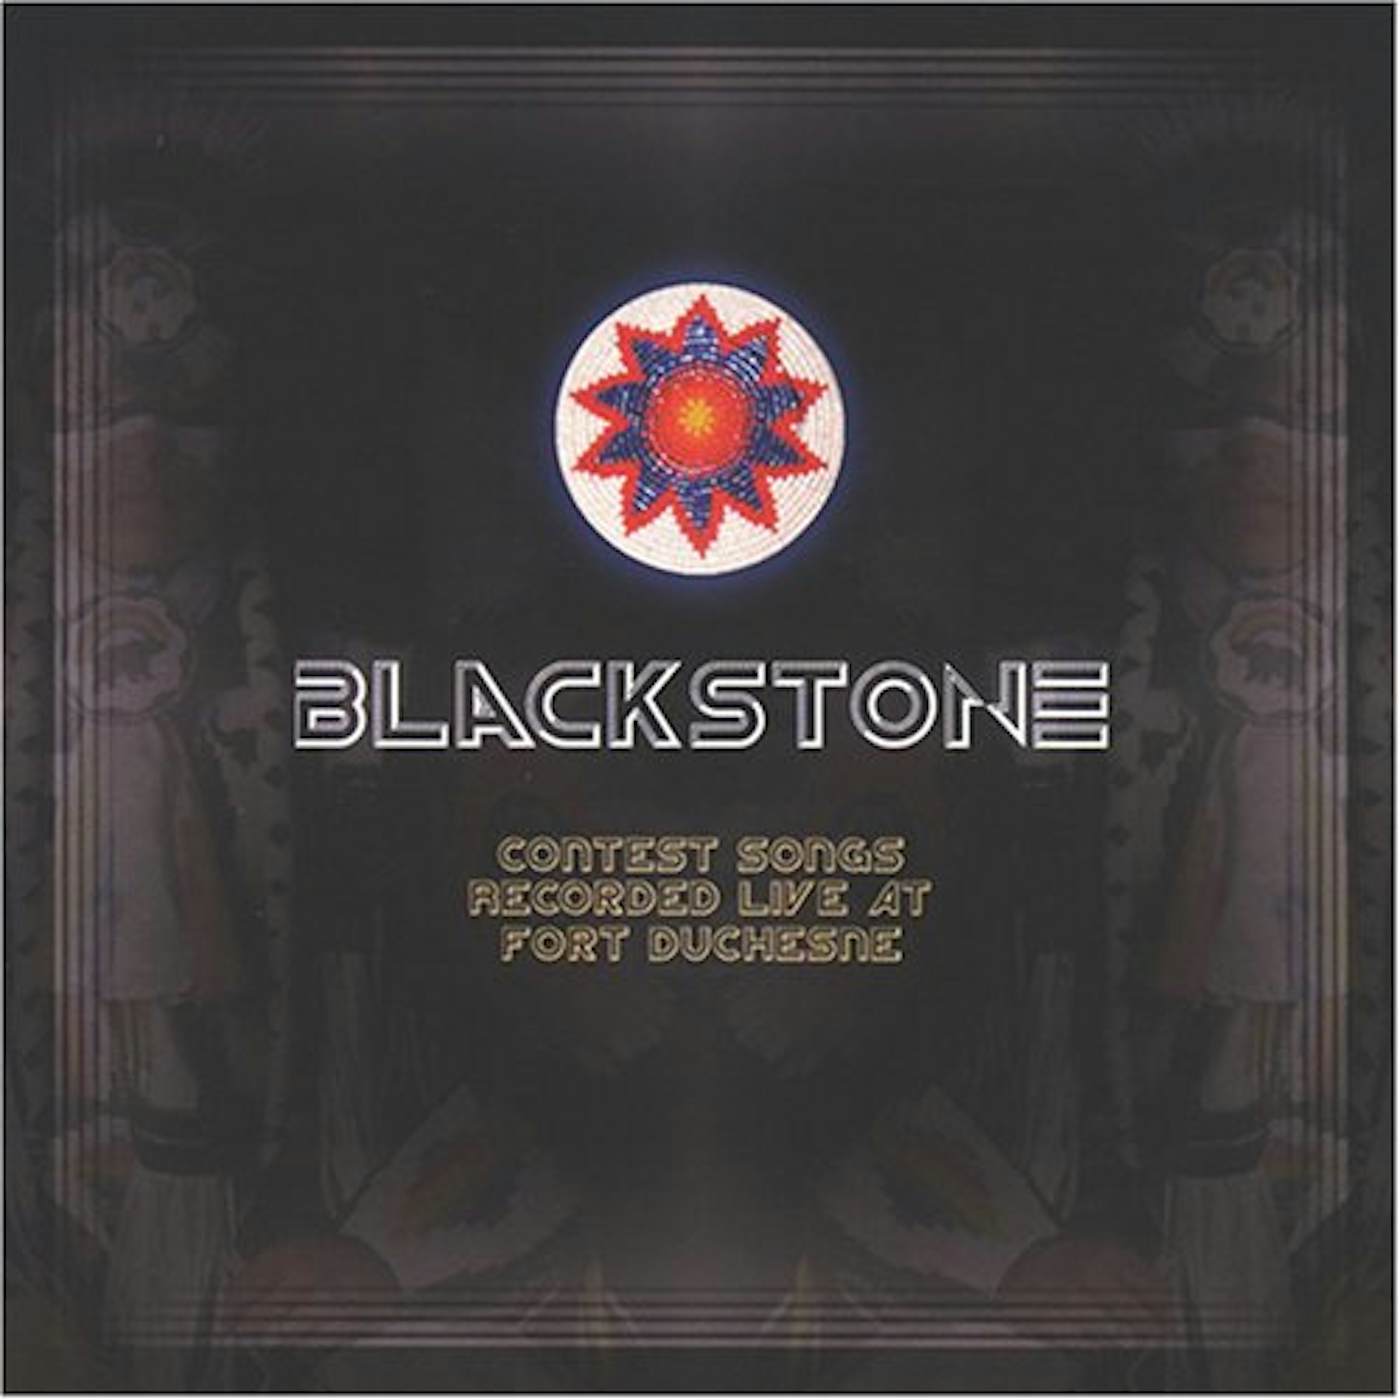 Blackstone CONTEST SONGS RECORDED LIVE AT FORT DUCHESNE CD